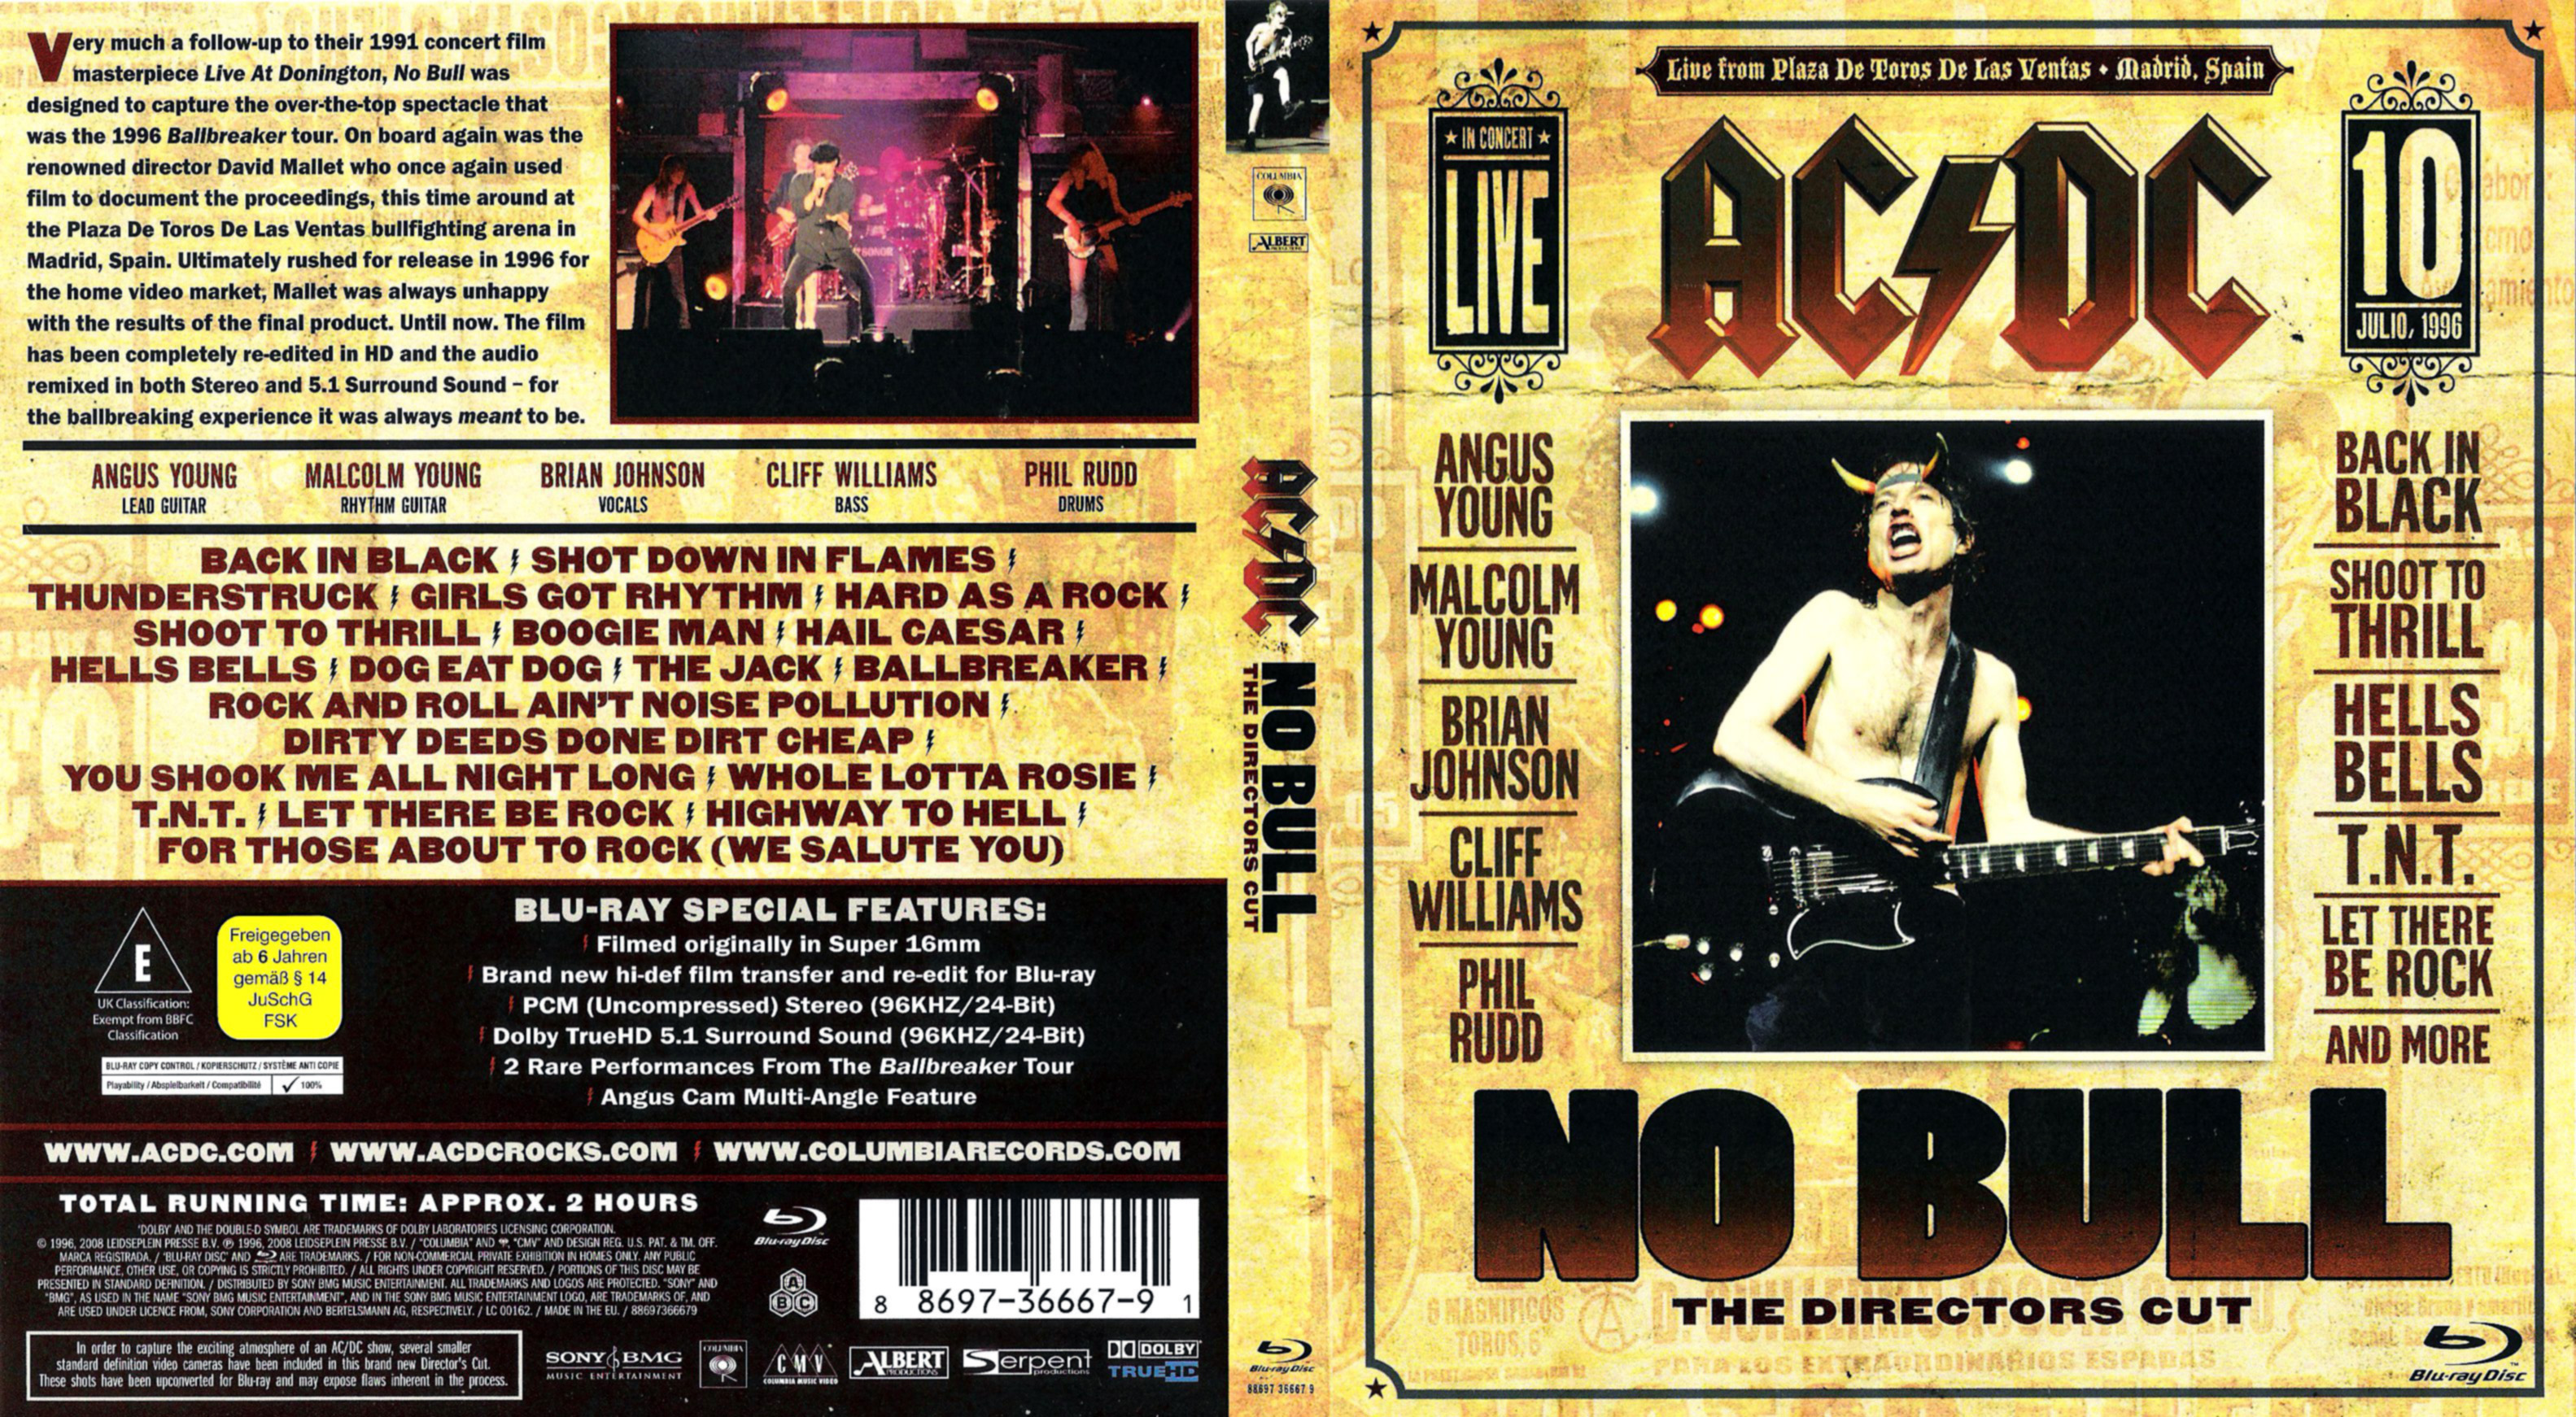 Jaquette DVD ACDC no bull (BLU-RAY)